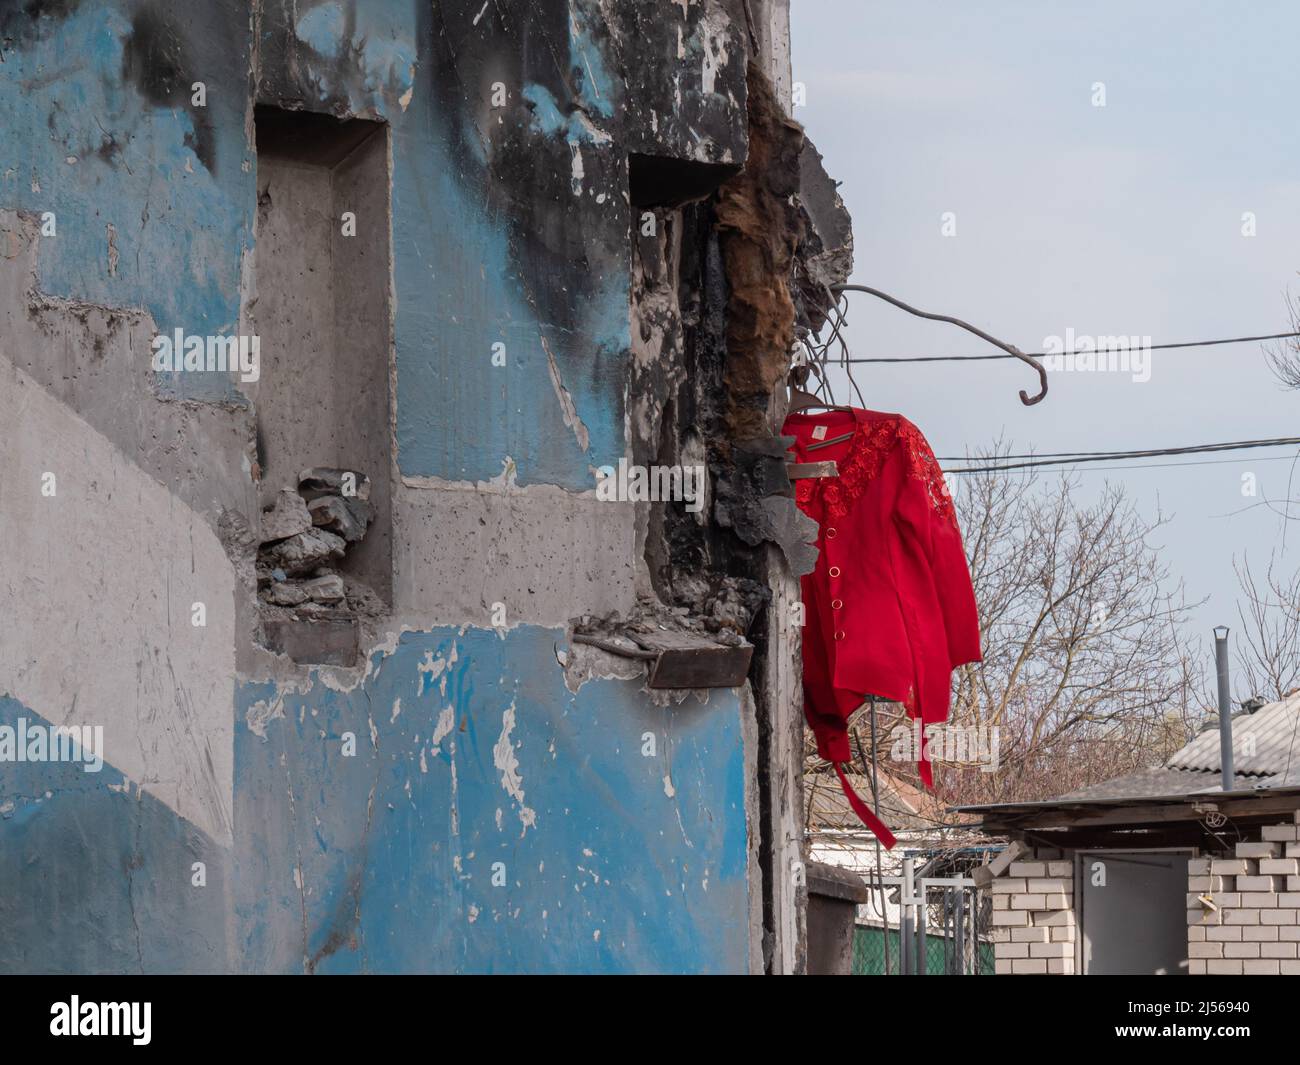 Russia's war against Ukraine. Russian bomb hit civilian buildings. War in Ukraine, ruined building after bombing. Red women's jacket against the background of a bombed-out house Stock Photo